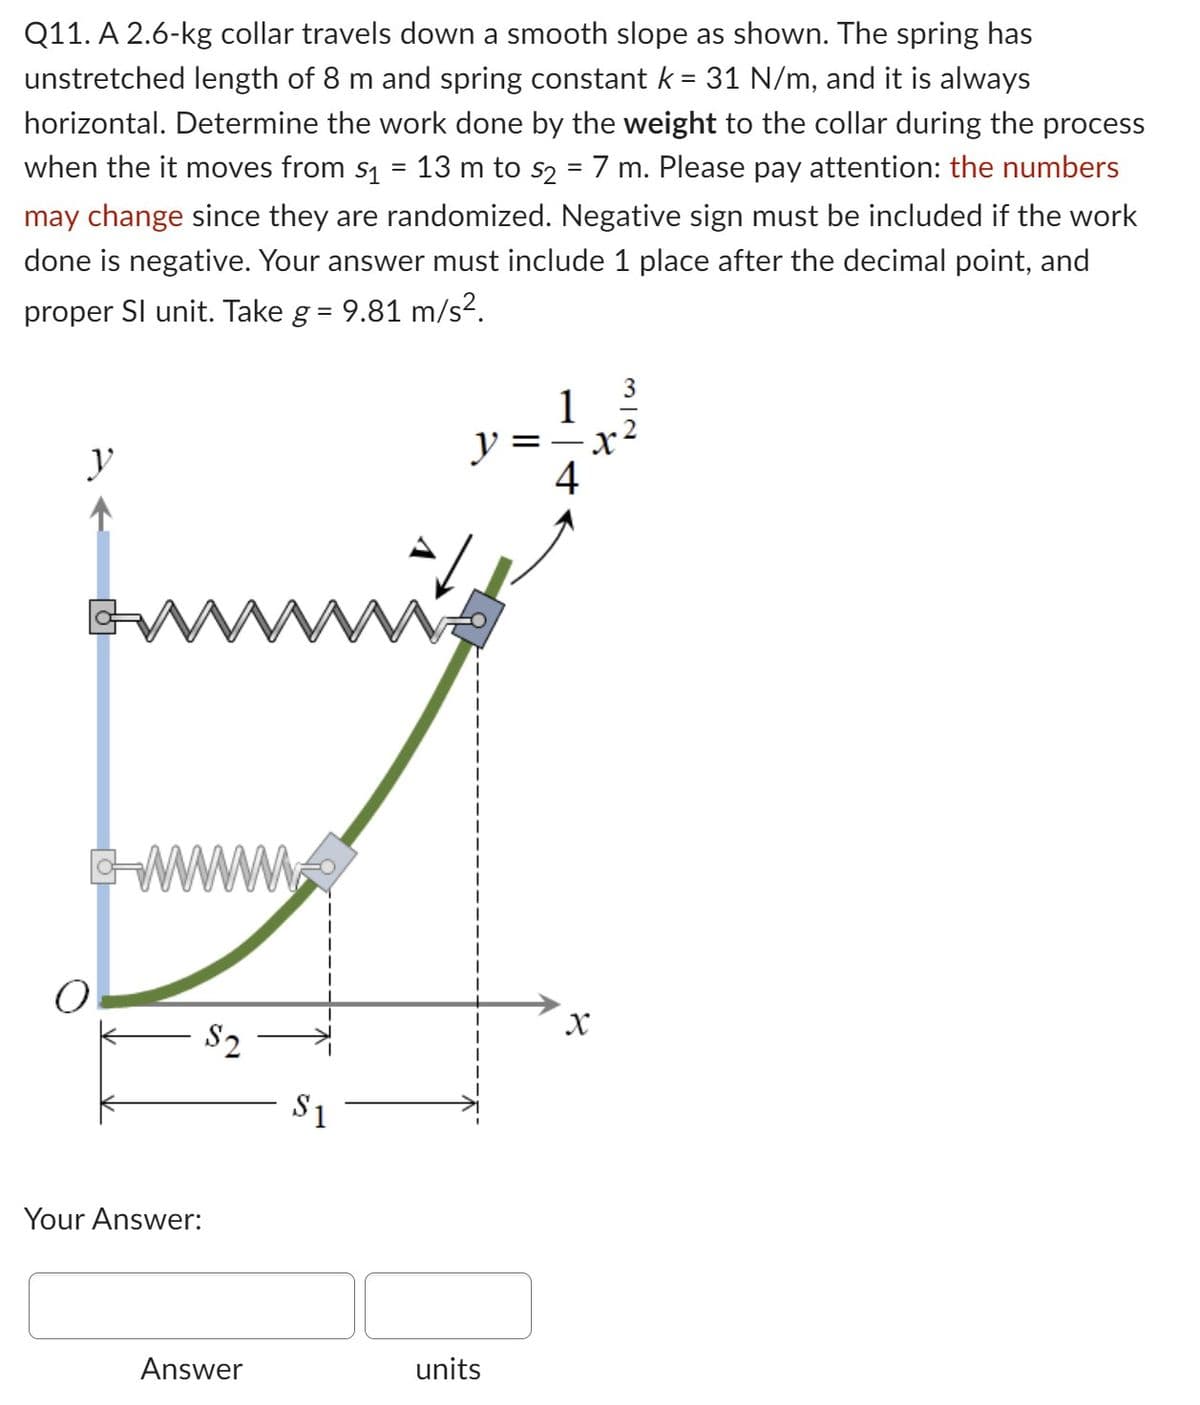 Q11. A 2.6-kg collar travels down a smooth slope as shown. The spring has
unstretched length of 8 m and spring constant k = 31 N/m, and it is always
horizontal. Determine the work done by the weight to the collar during the process
when the it moves from s₁ = 13 m to s2 = 7 m. Please pay attention: the numbers
may change since they are randomized. Negative sign must be included if the work
done is negative. Your answer must include 1 place after the decimal point, and
proper Sl unit. Take g = 9.81 m/s².
y
GW
O
www
Your Answer:
$2
Answer
y
www.
$1
units
=
4
X